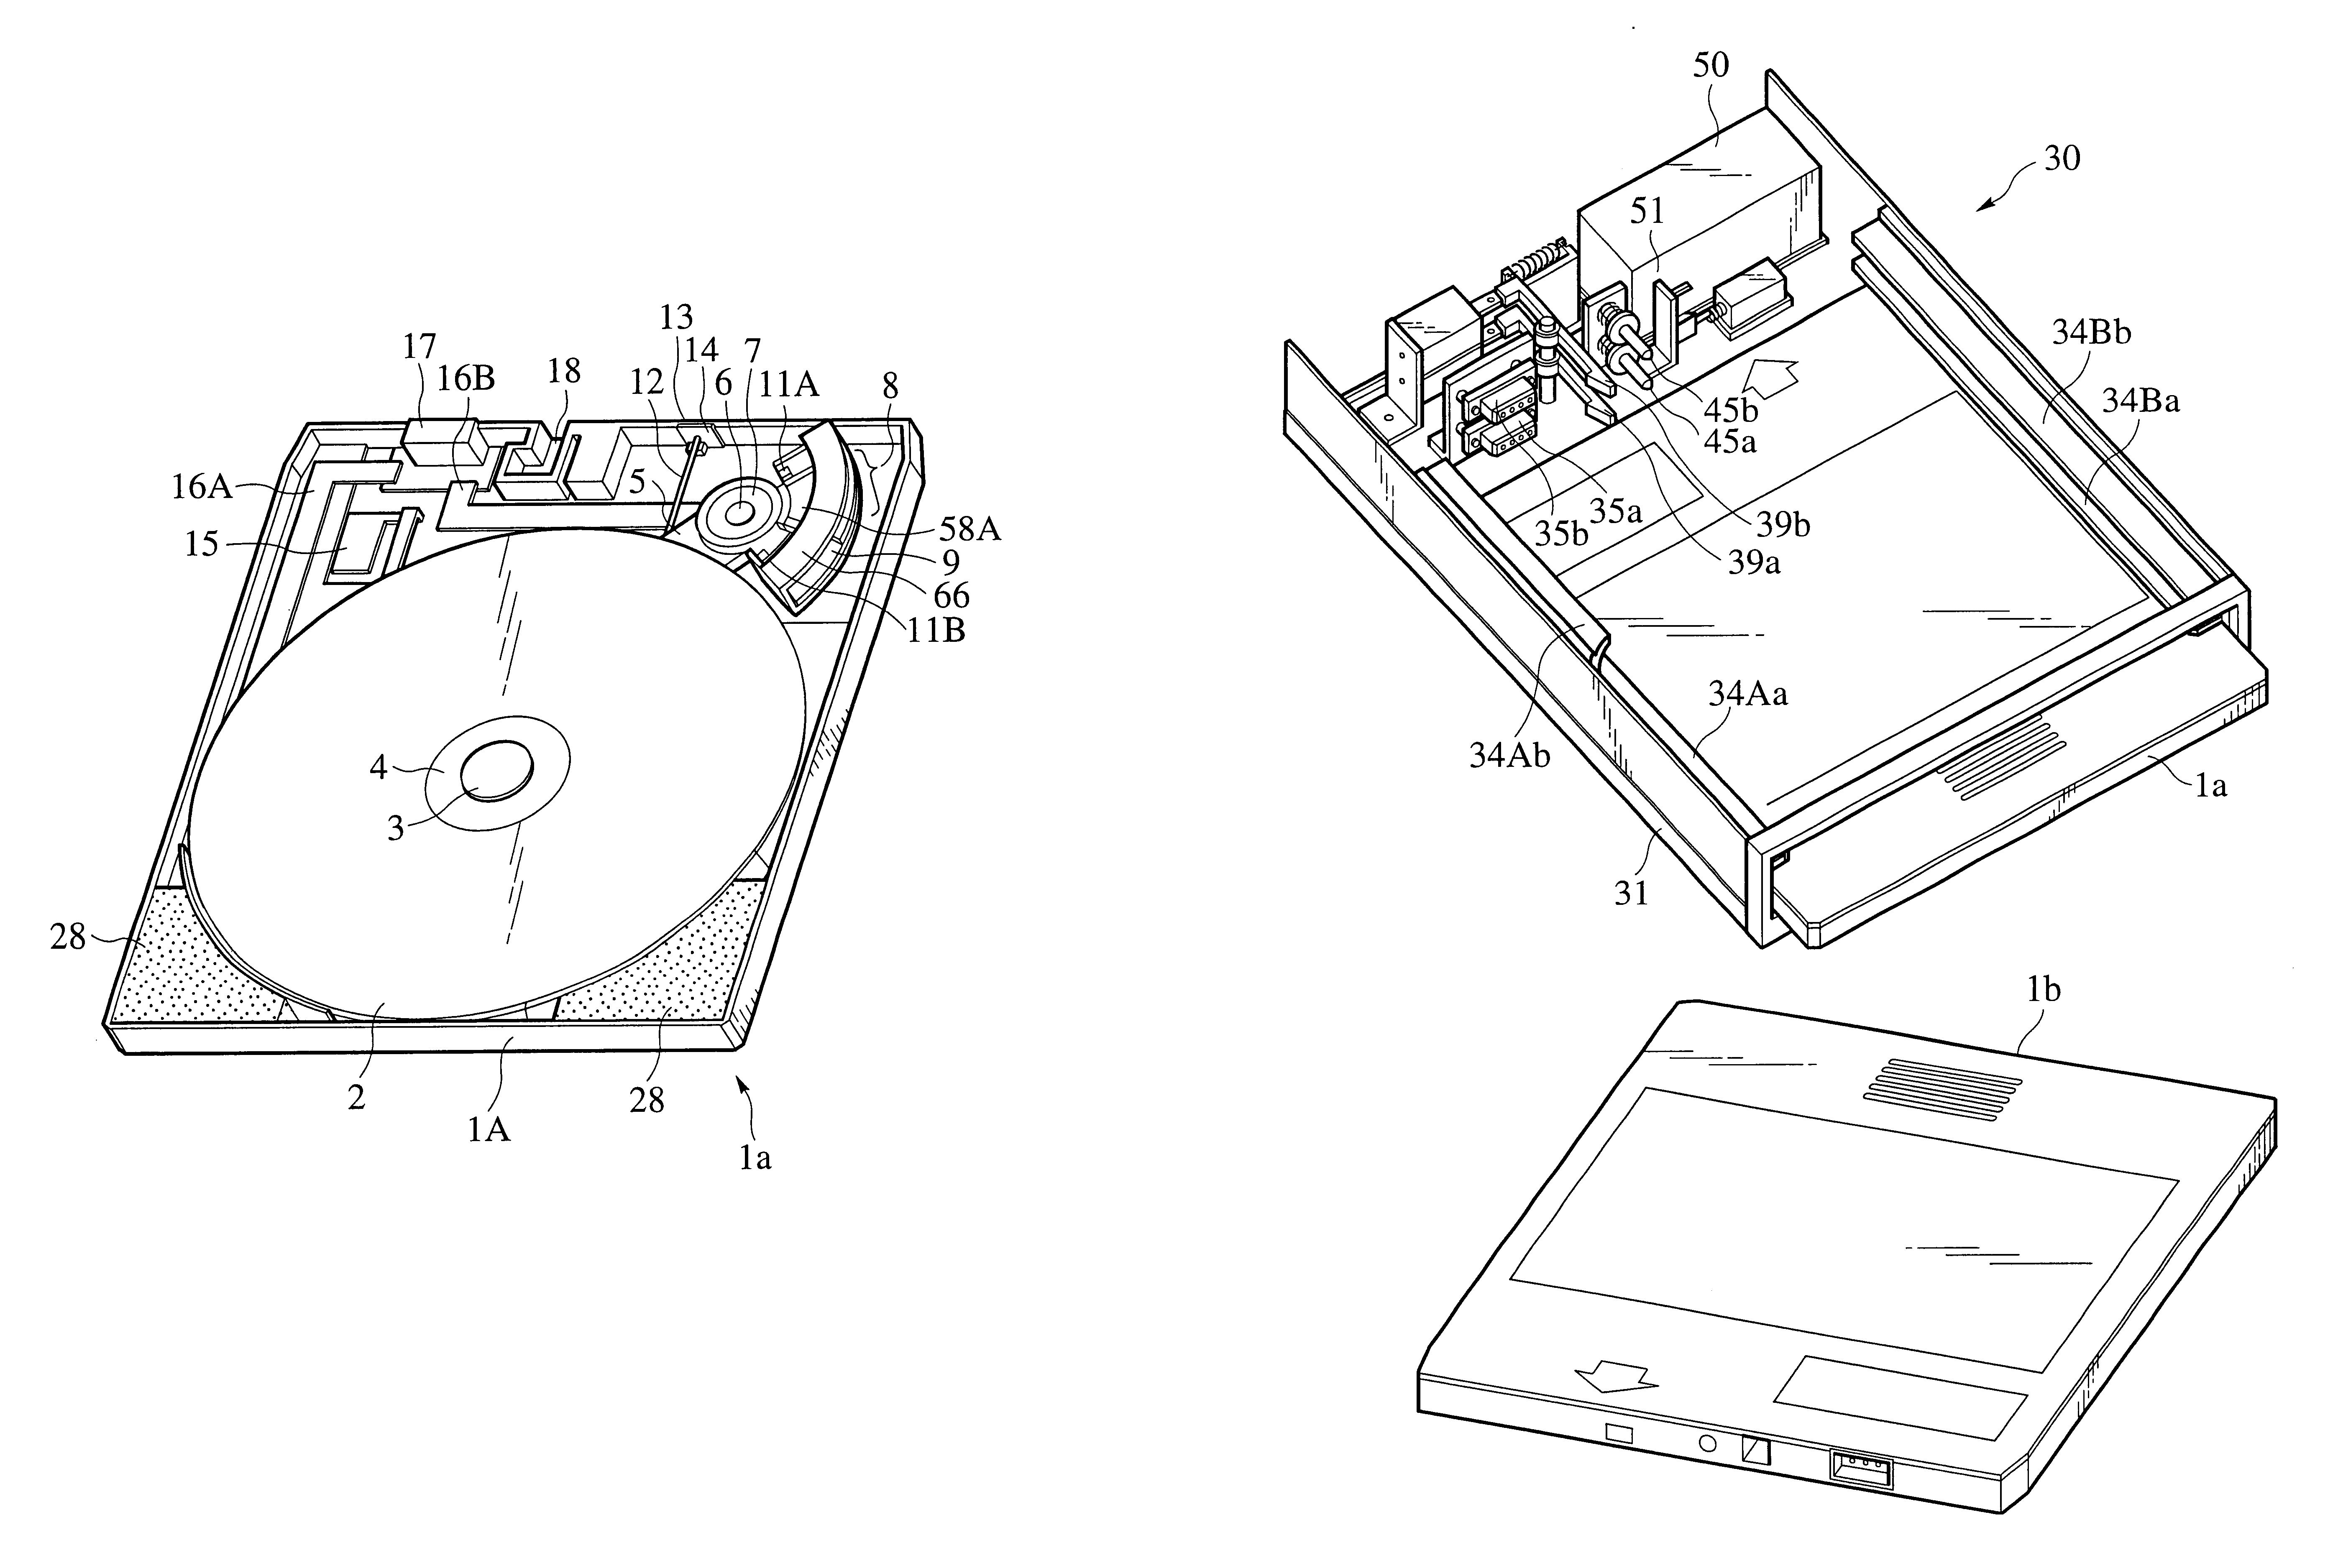 Disk cartridge, optical disk drive, optical library and optical storage system